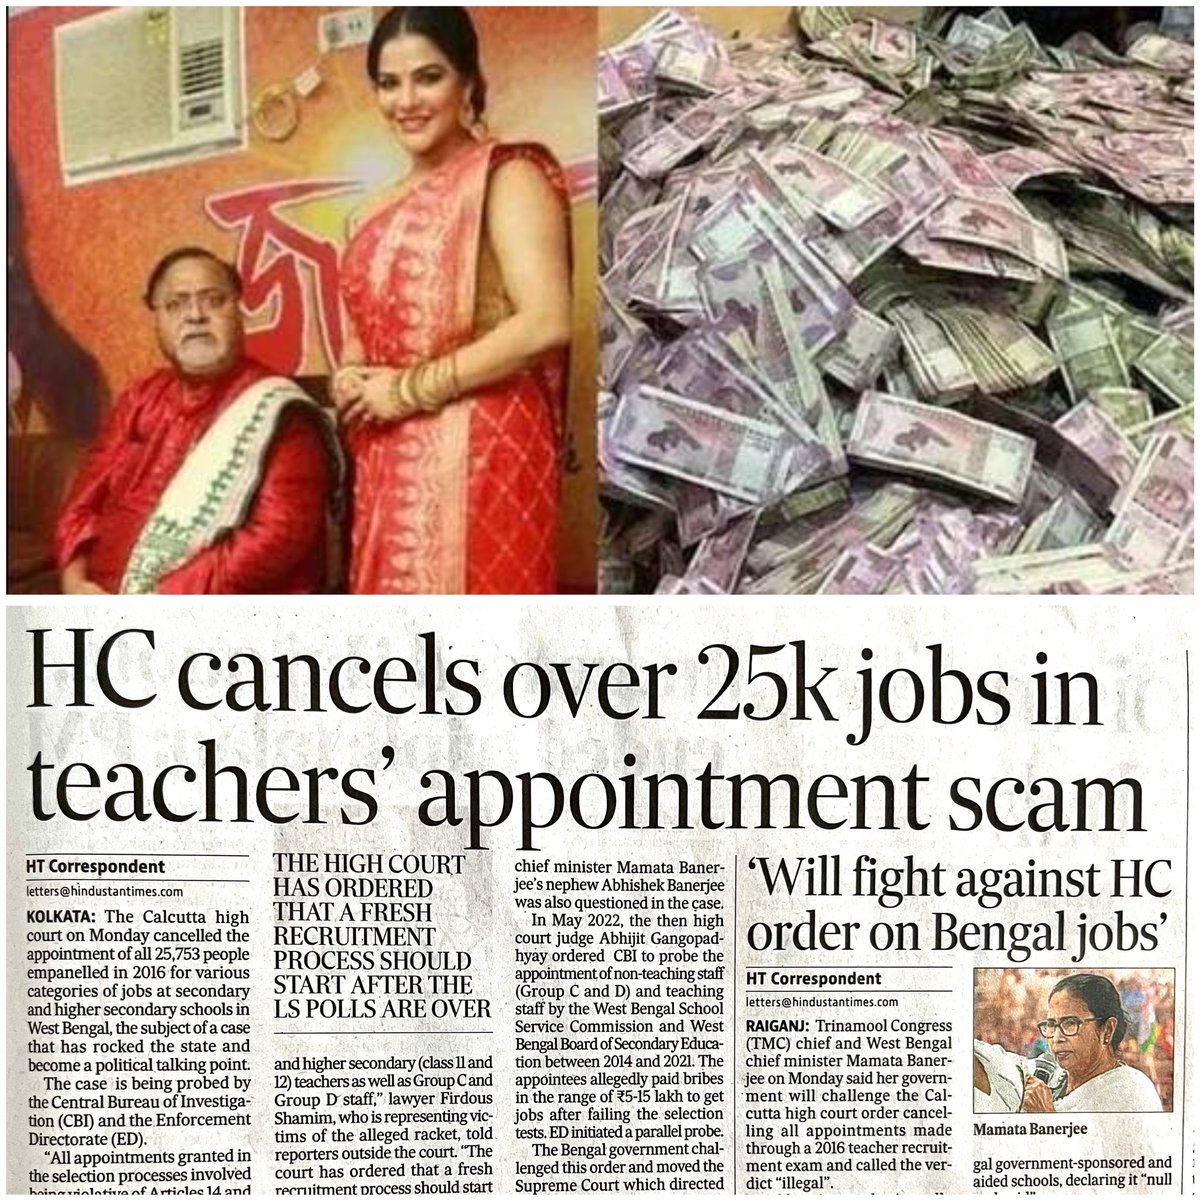 Remember the ED raid at TMC minister Partha Chatterjee and Arpita Mukherjee. Right, the same. Now, in the WB cash-for-job scam HC cancelled all 25K appointments. The story that should be headline, but it isn't!